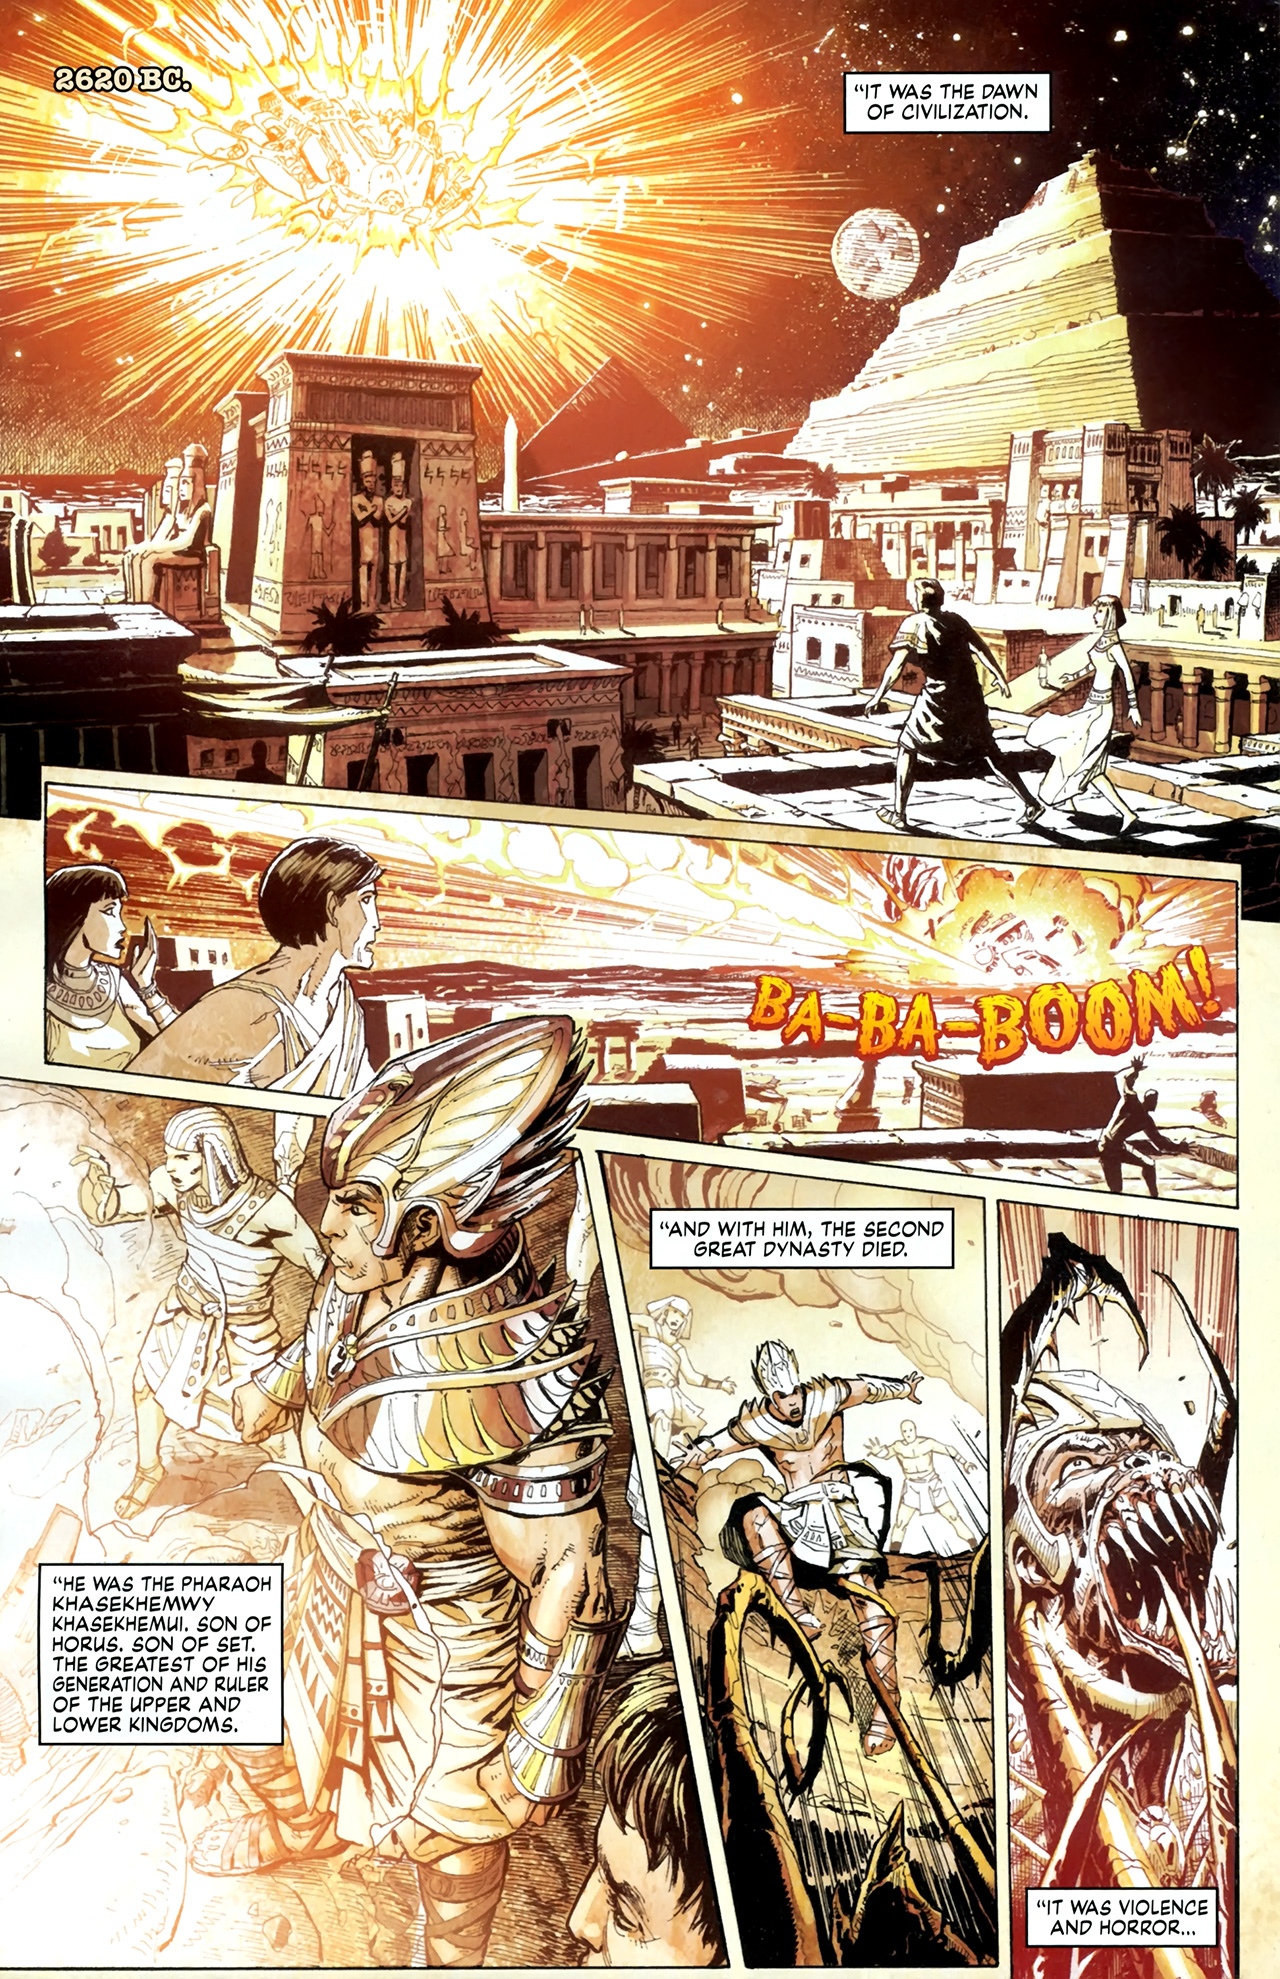 S.H.I.E.L.D. (2010) Issue #1 #2 - English 8